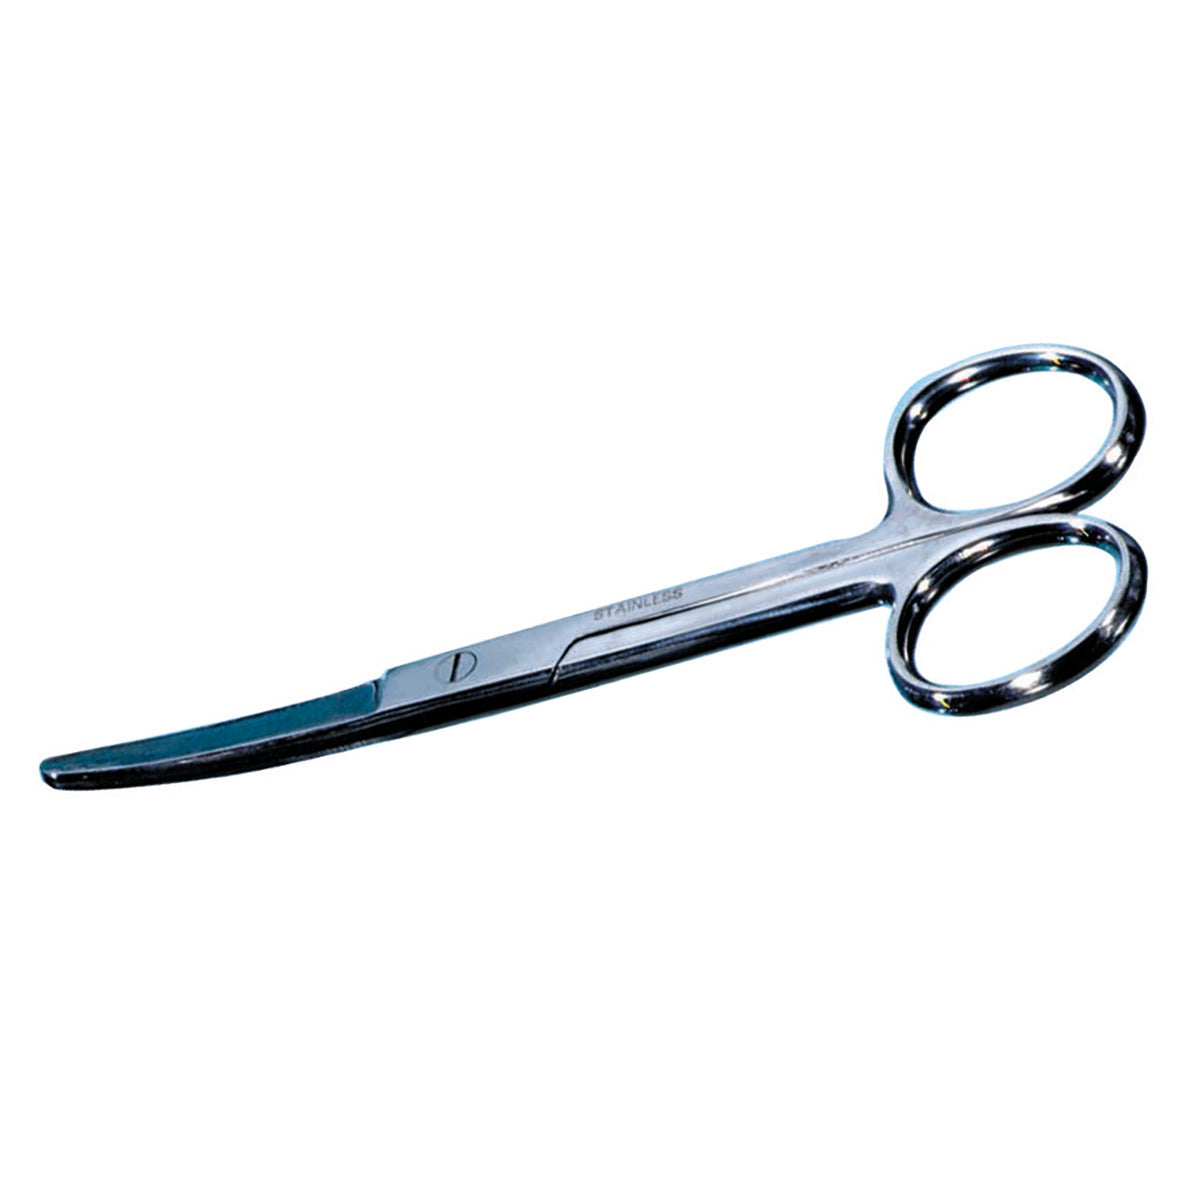 Stainless Steel Curved Scissors 6"